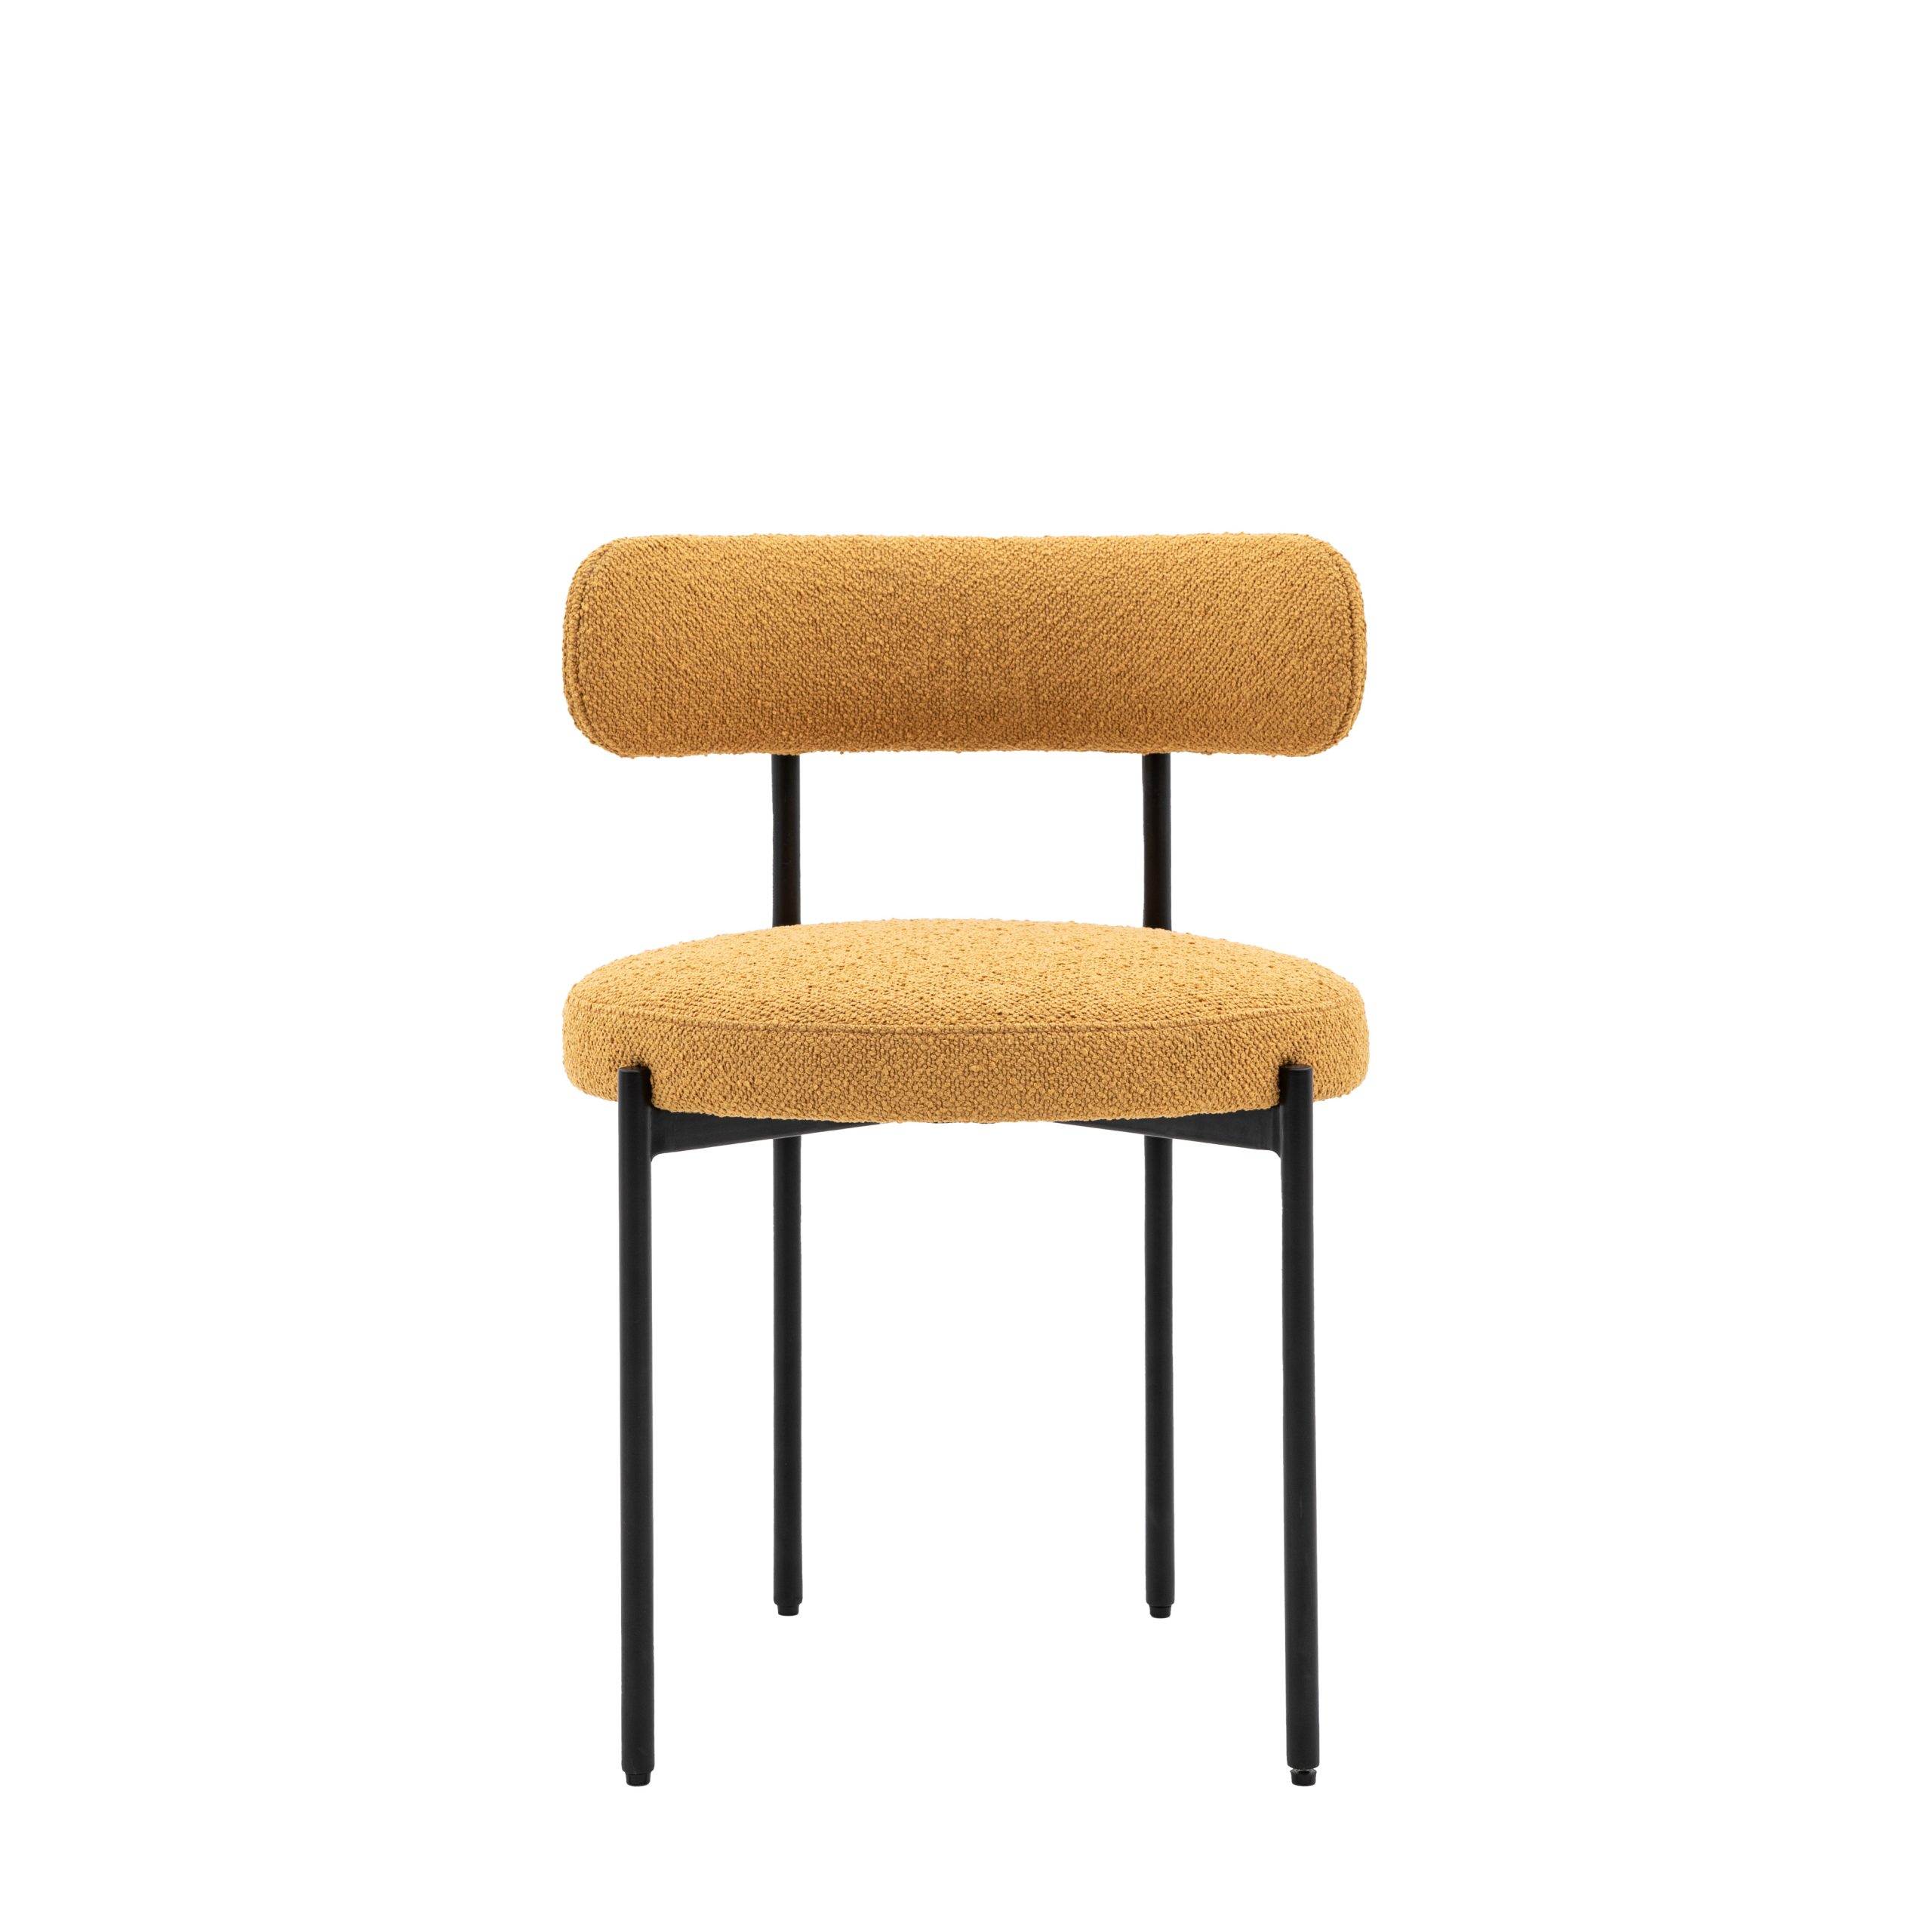 Gallery Direct Aveley Dining Chair Ochre (Set of 2)